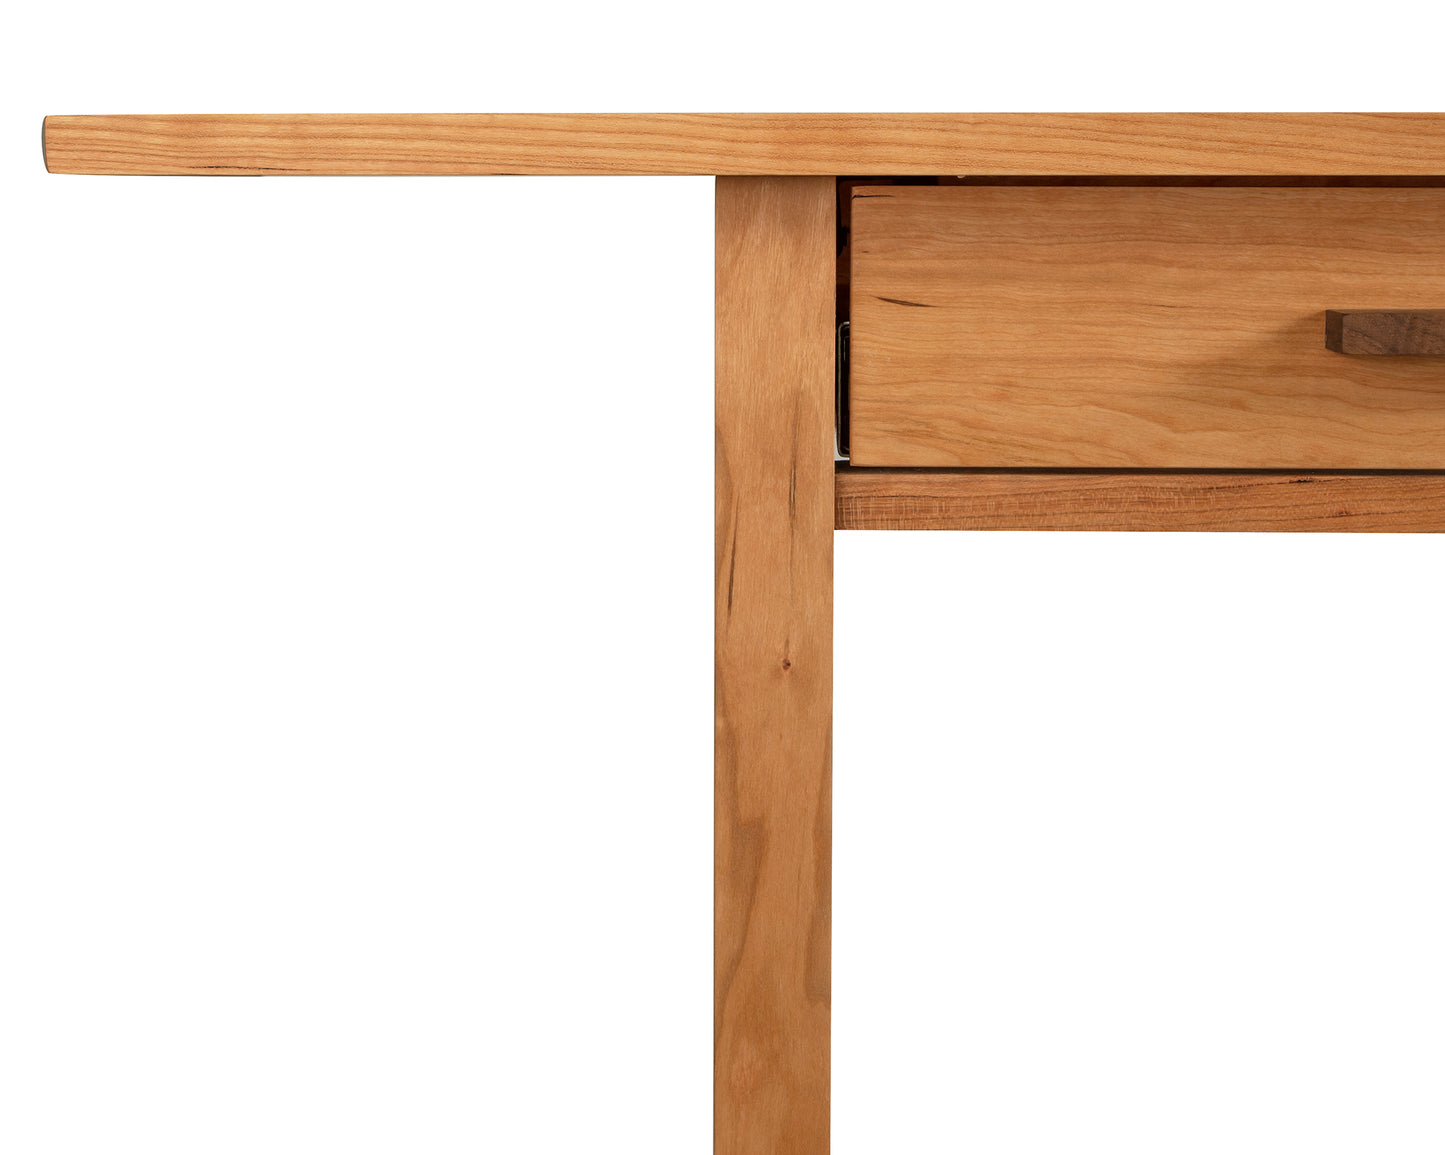 The sentence becomes: A handcrafted Modern Craftsman 2-Drawer Console Table with a simplistic design featuring two drawers, set against a white background by Vermont Furniture Designs.